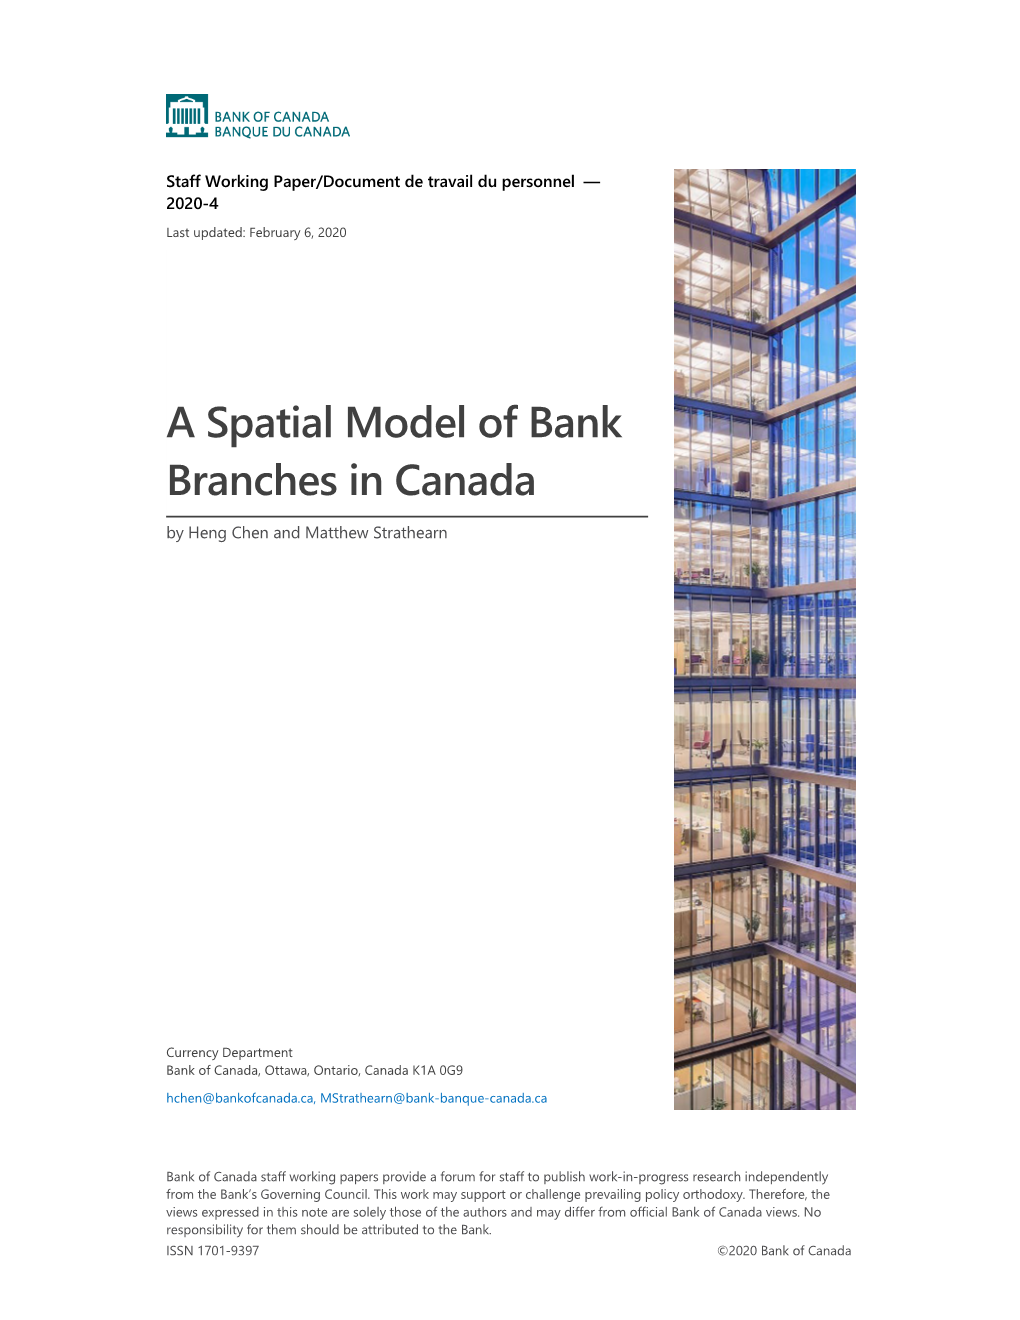 A Spatial Model of Bank Branches in Canada by Heng Chen and Matthew Strathearn